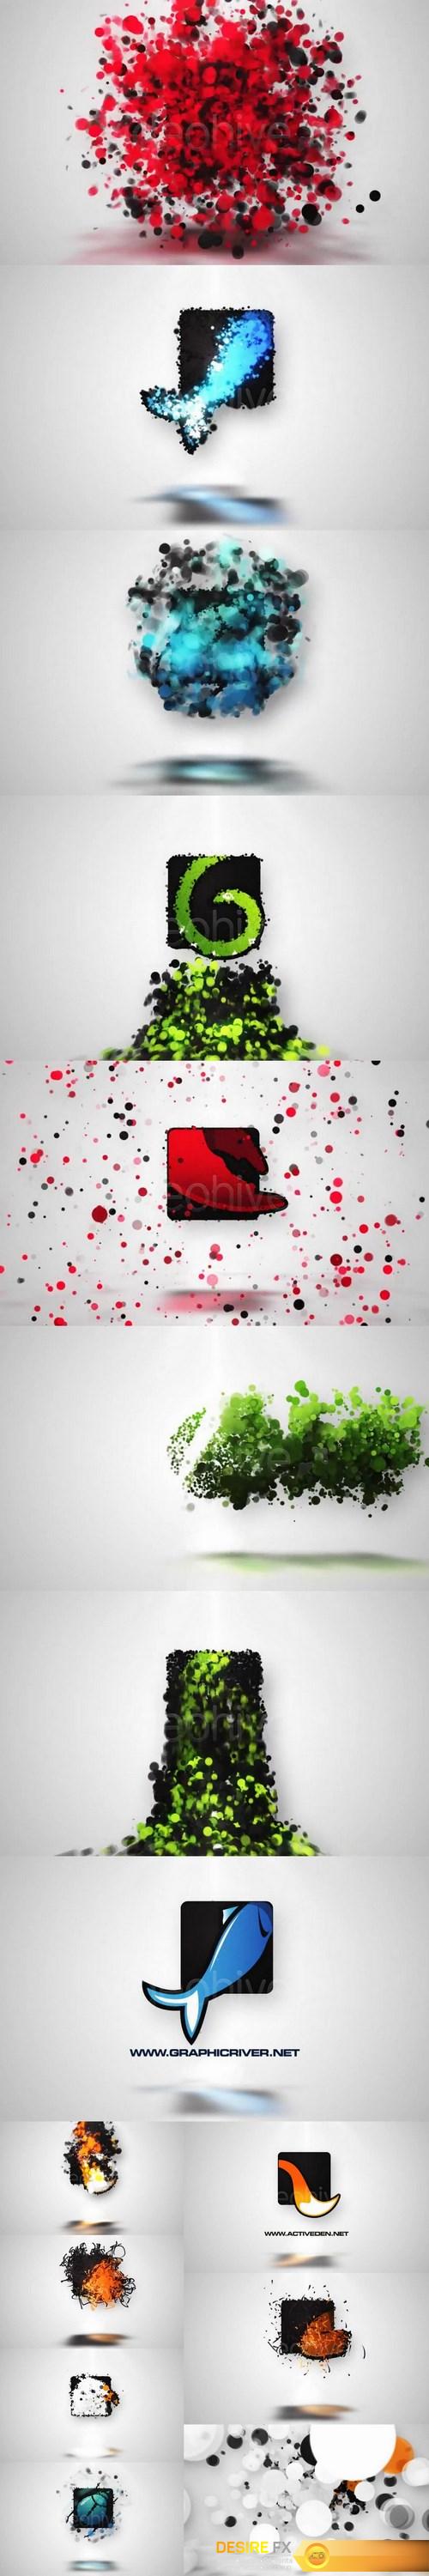 videohive-3254938-logo-particle-intro-8in1